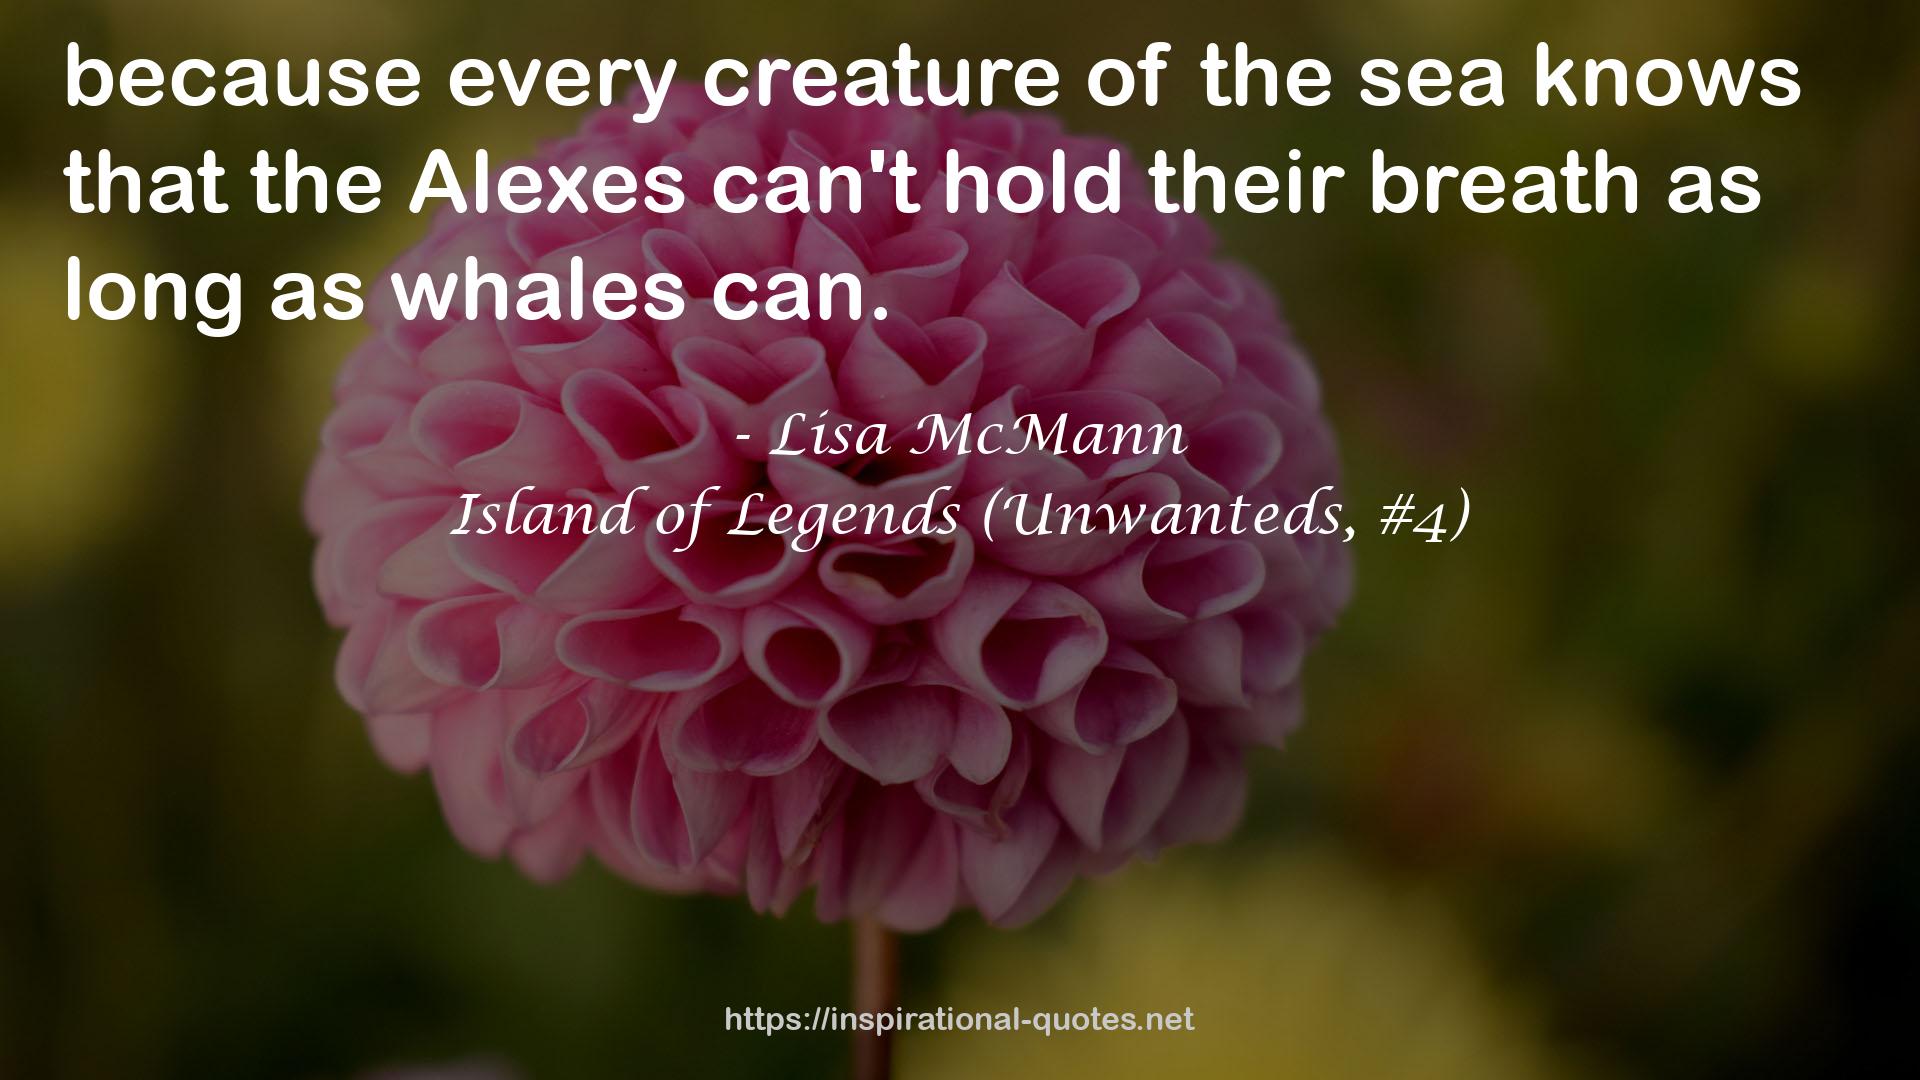 Island of Legends (Unwanteds, #4) QUOTES